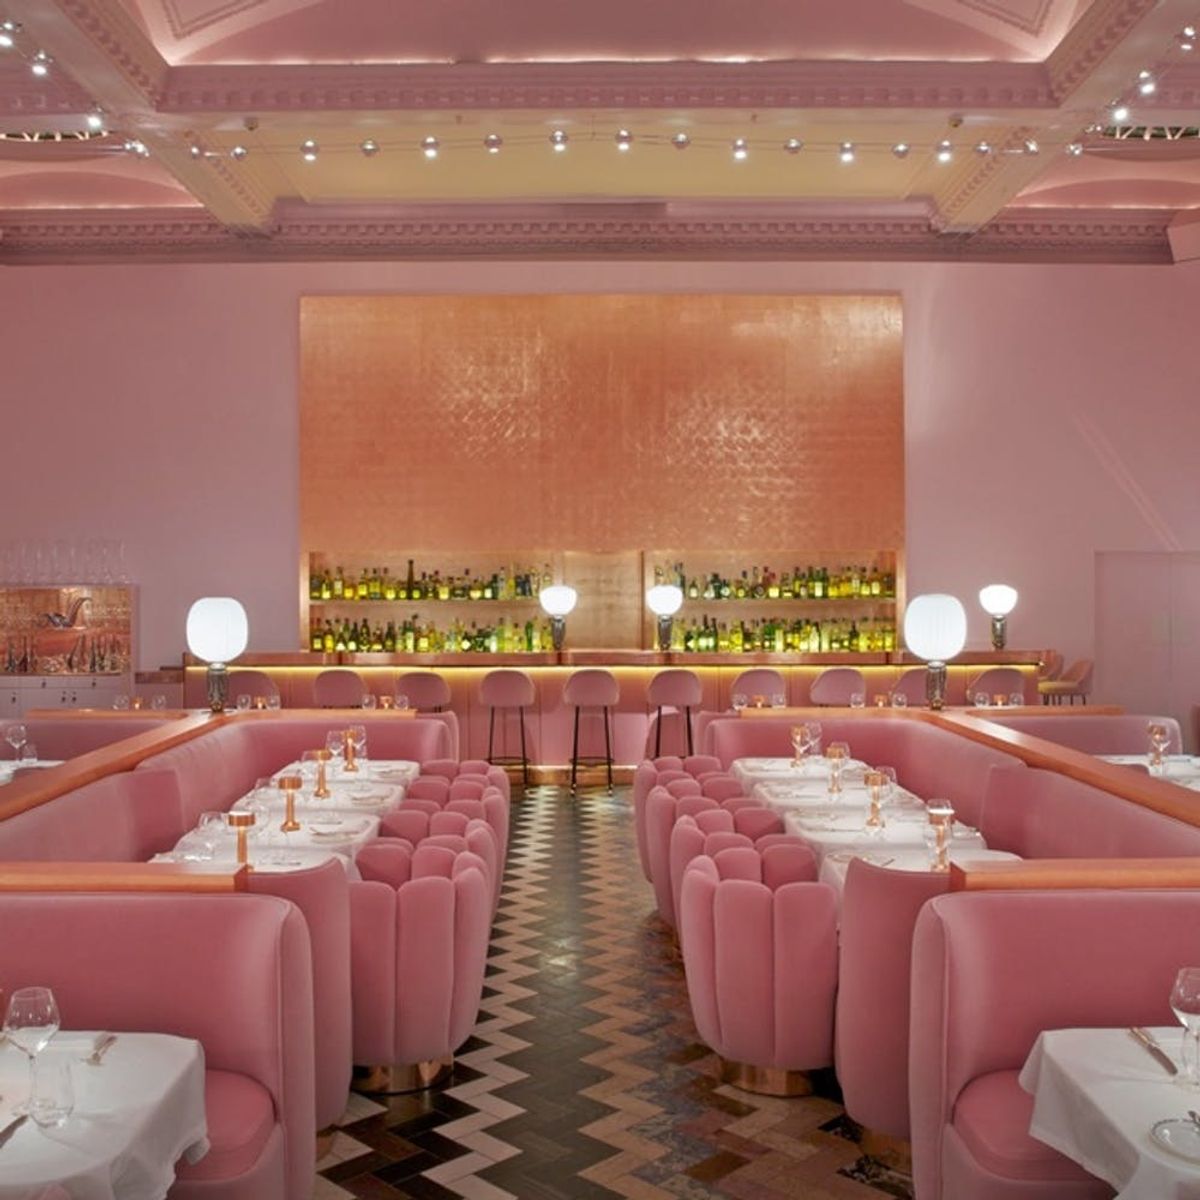 These Real-Life Locations Look Straight Out of a Wes Anderson Film